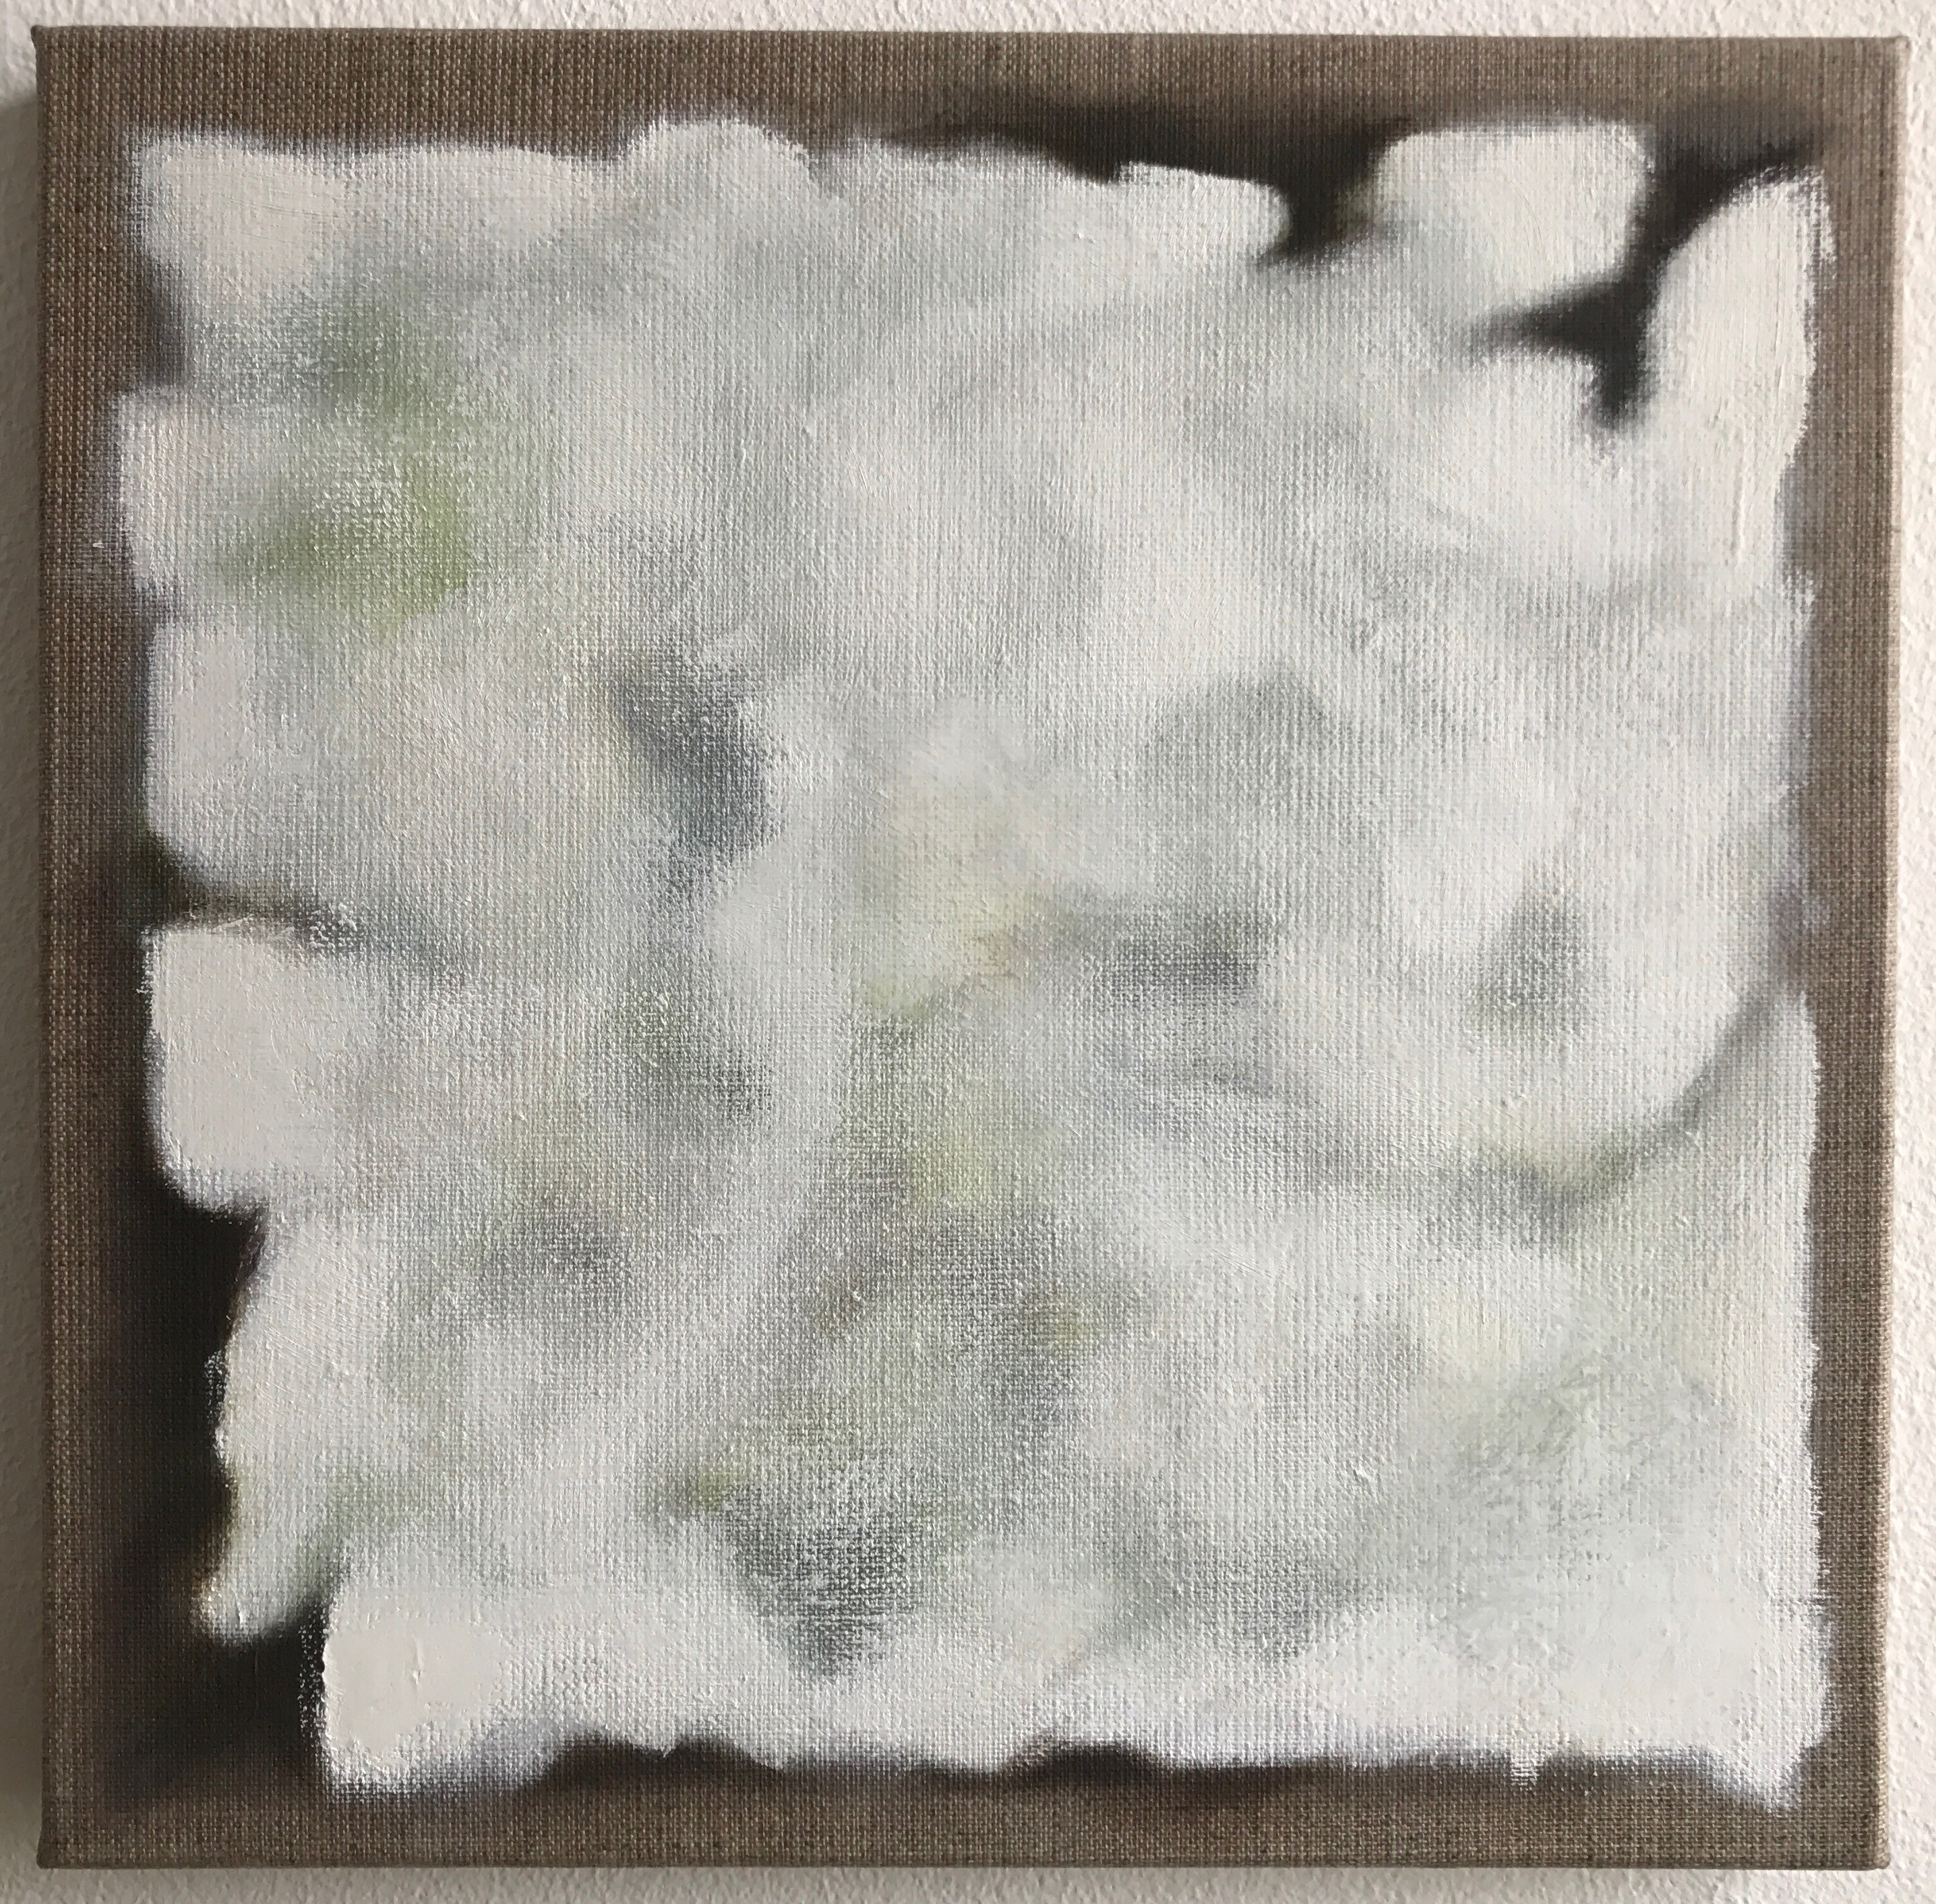 series of 3 paintings, monochrome white